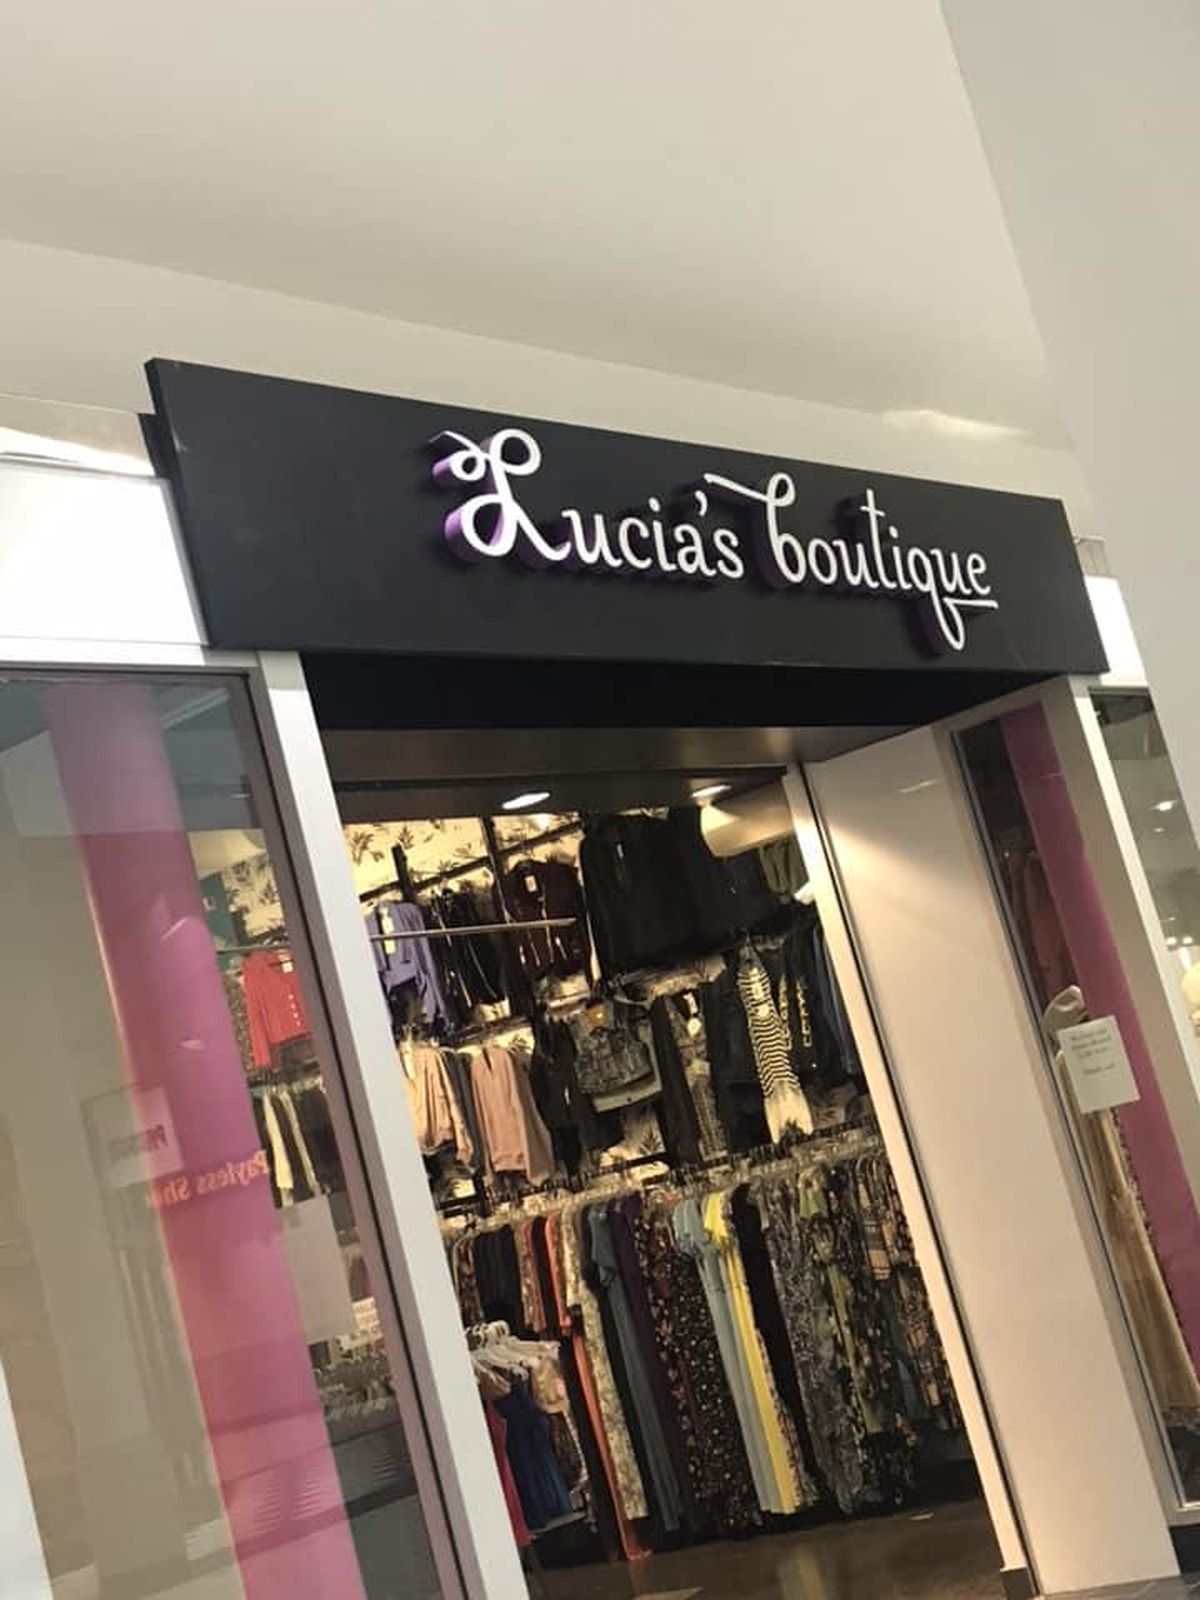 Lucia’s Boutique storefront, where a transgender teen says she was turned away while dress shopping earlier this week. (KHQ)